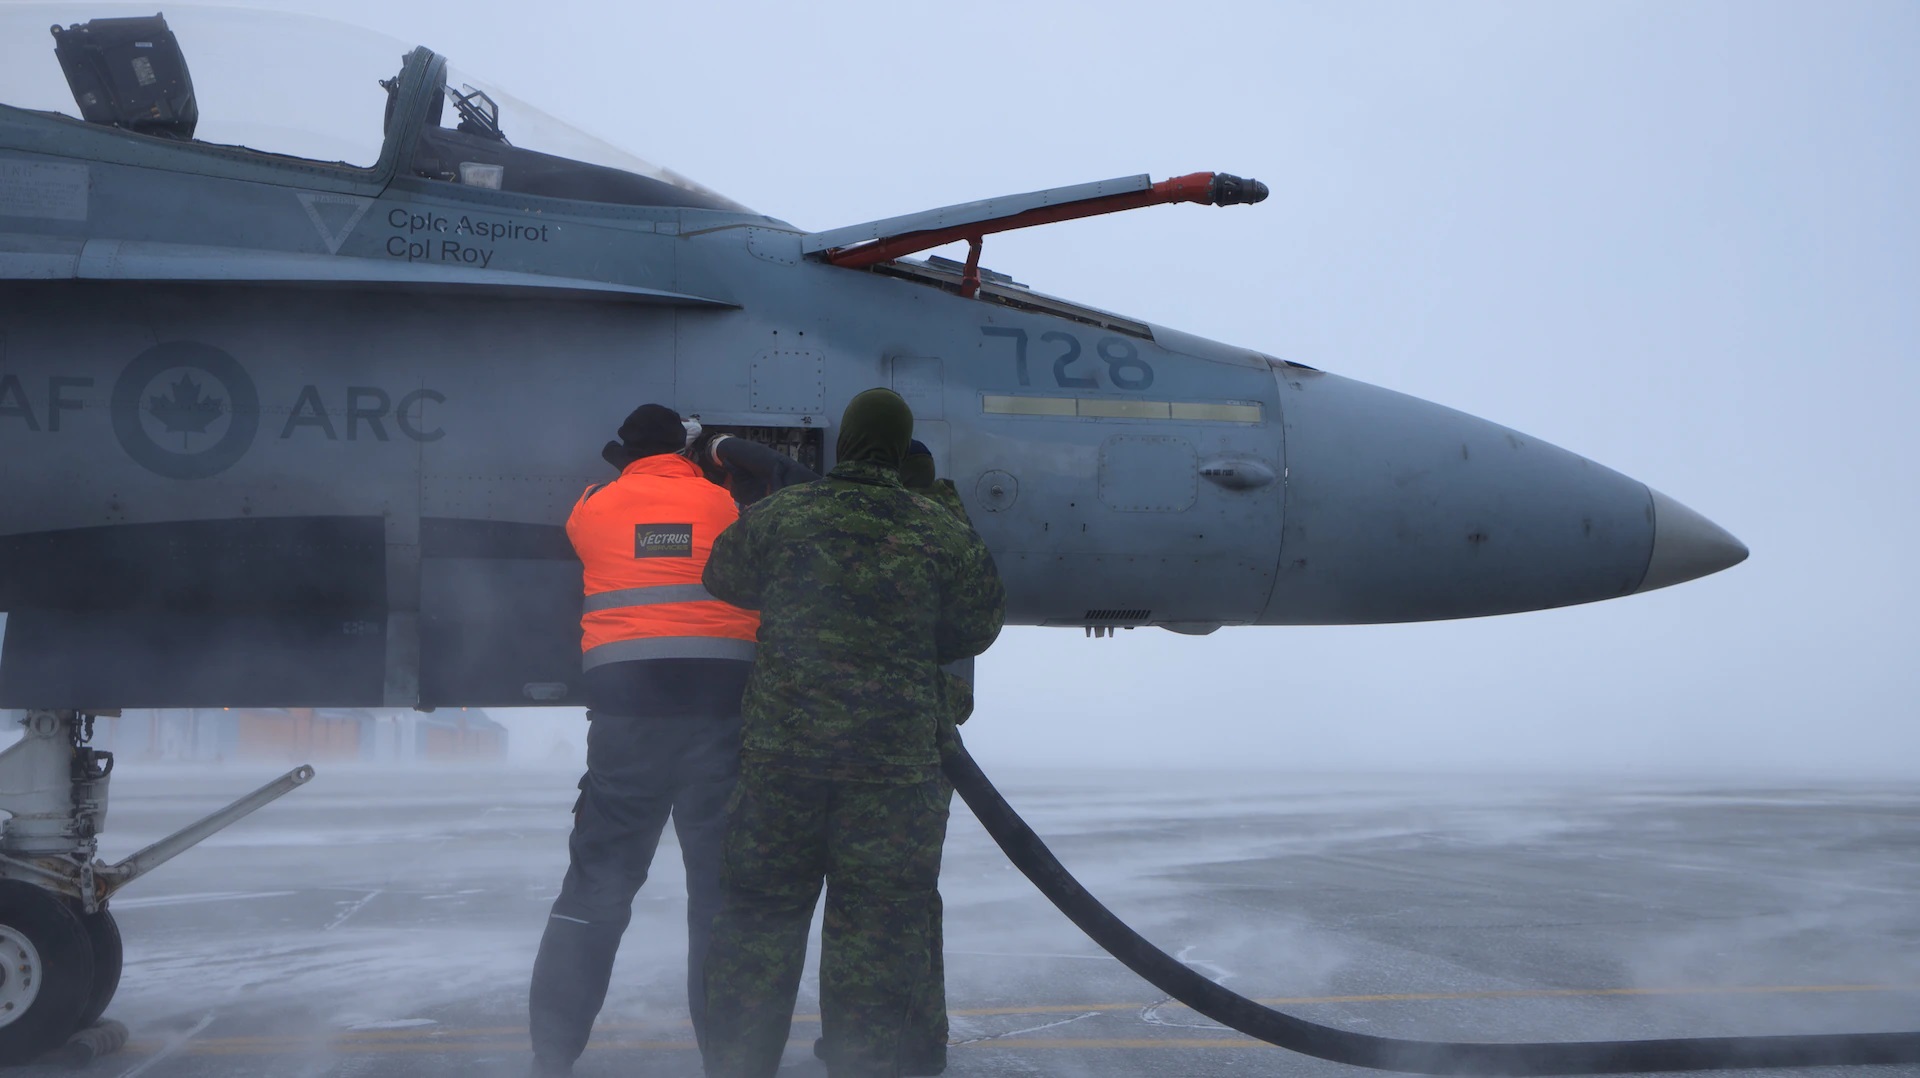 NORAD detects, tracks, and identifies Russian aircraft entering Canada Air Defense Identification Zones